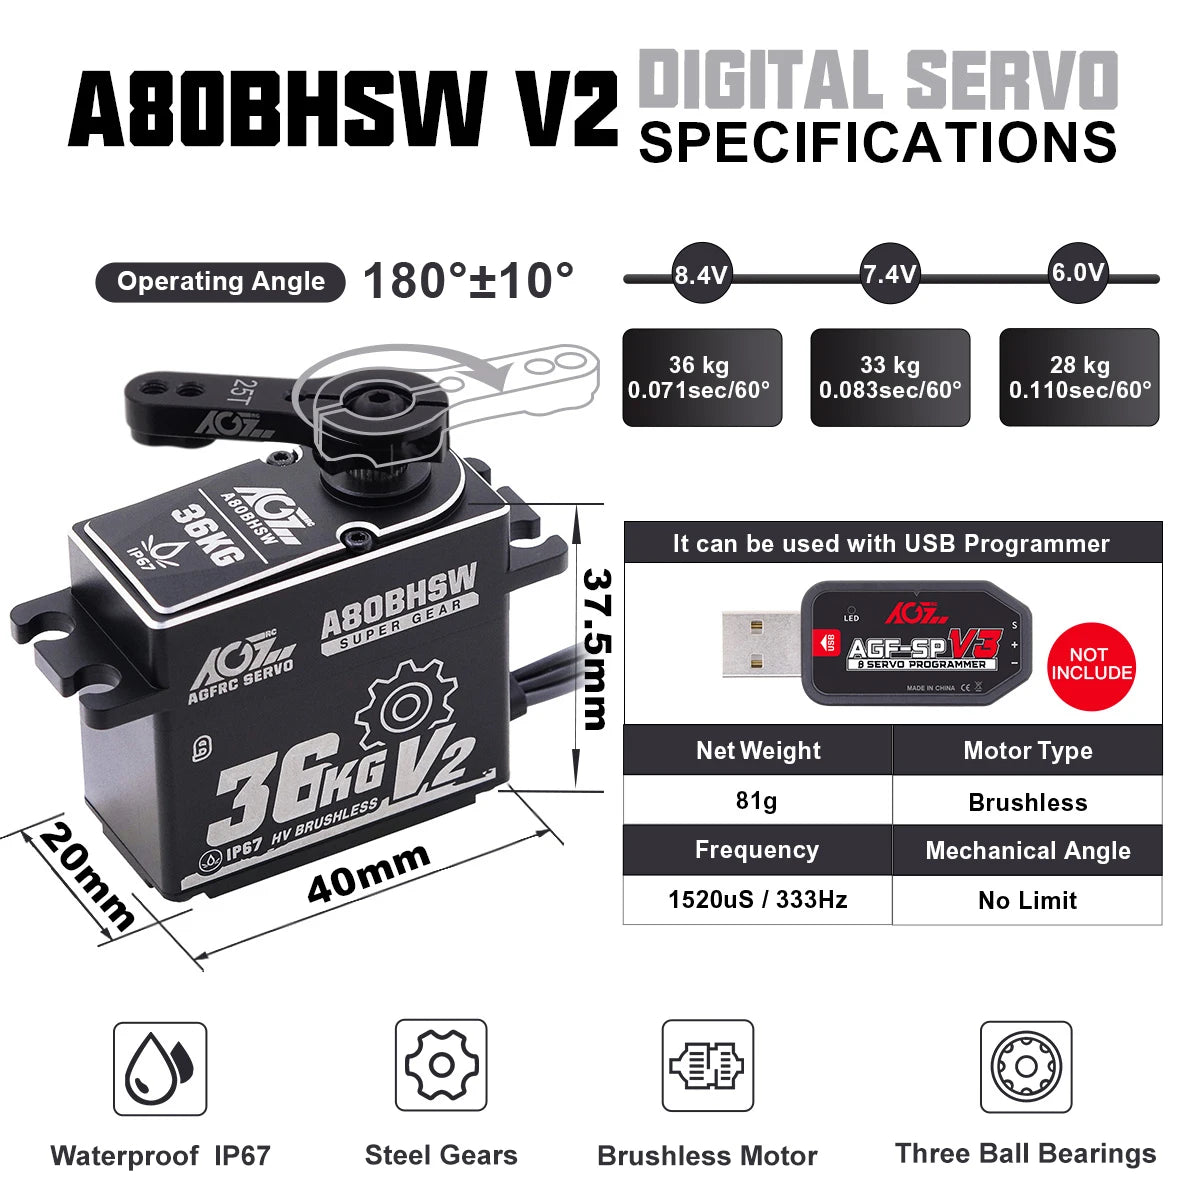 AGFRC A80BHSW V2, ABOBHSW V2 SPECIFICATIONS Operating Angle 180*+108 8.